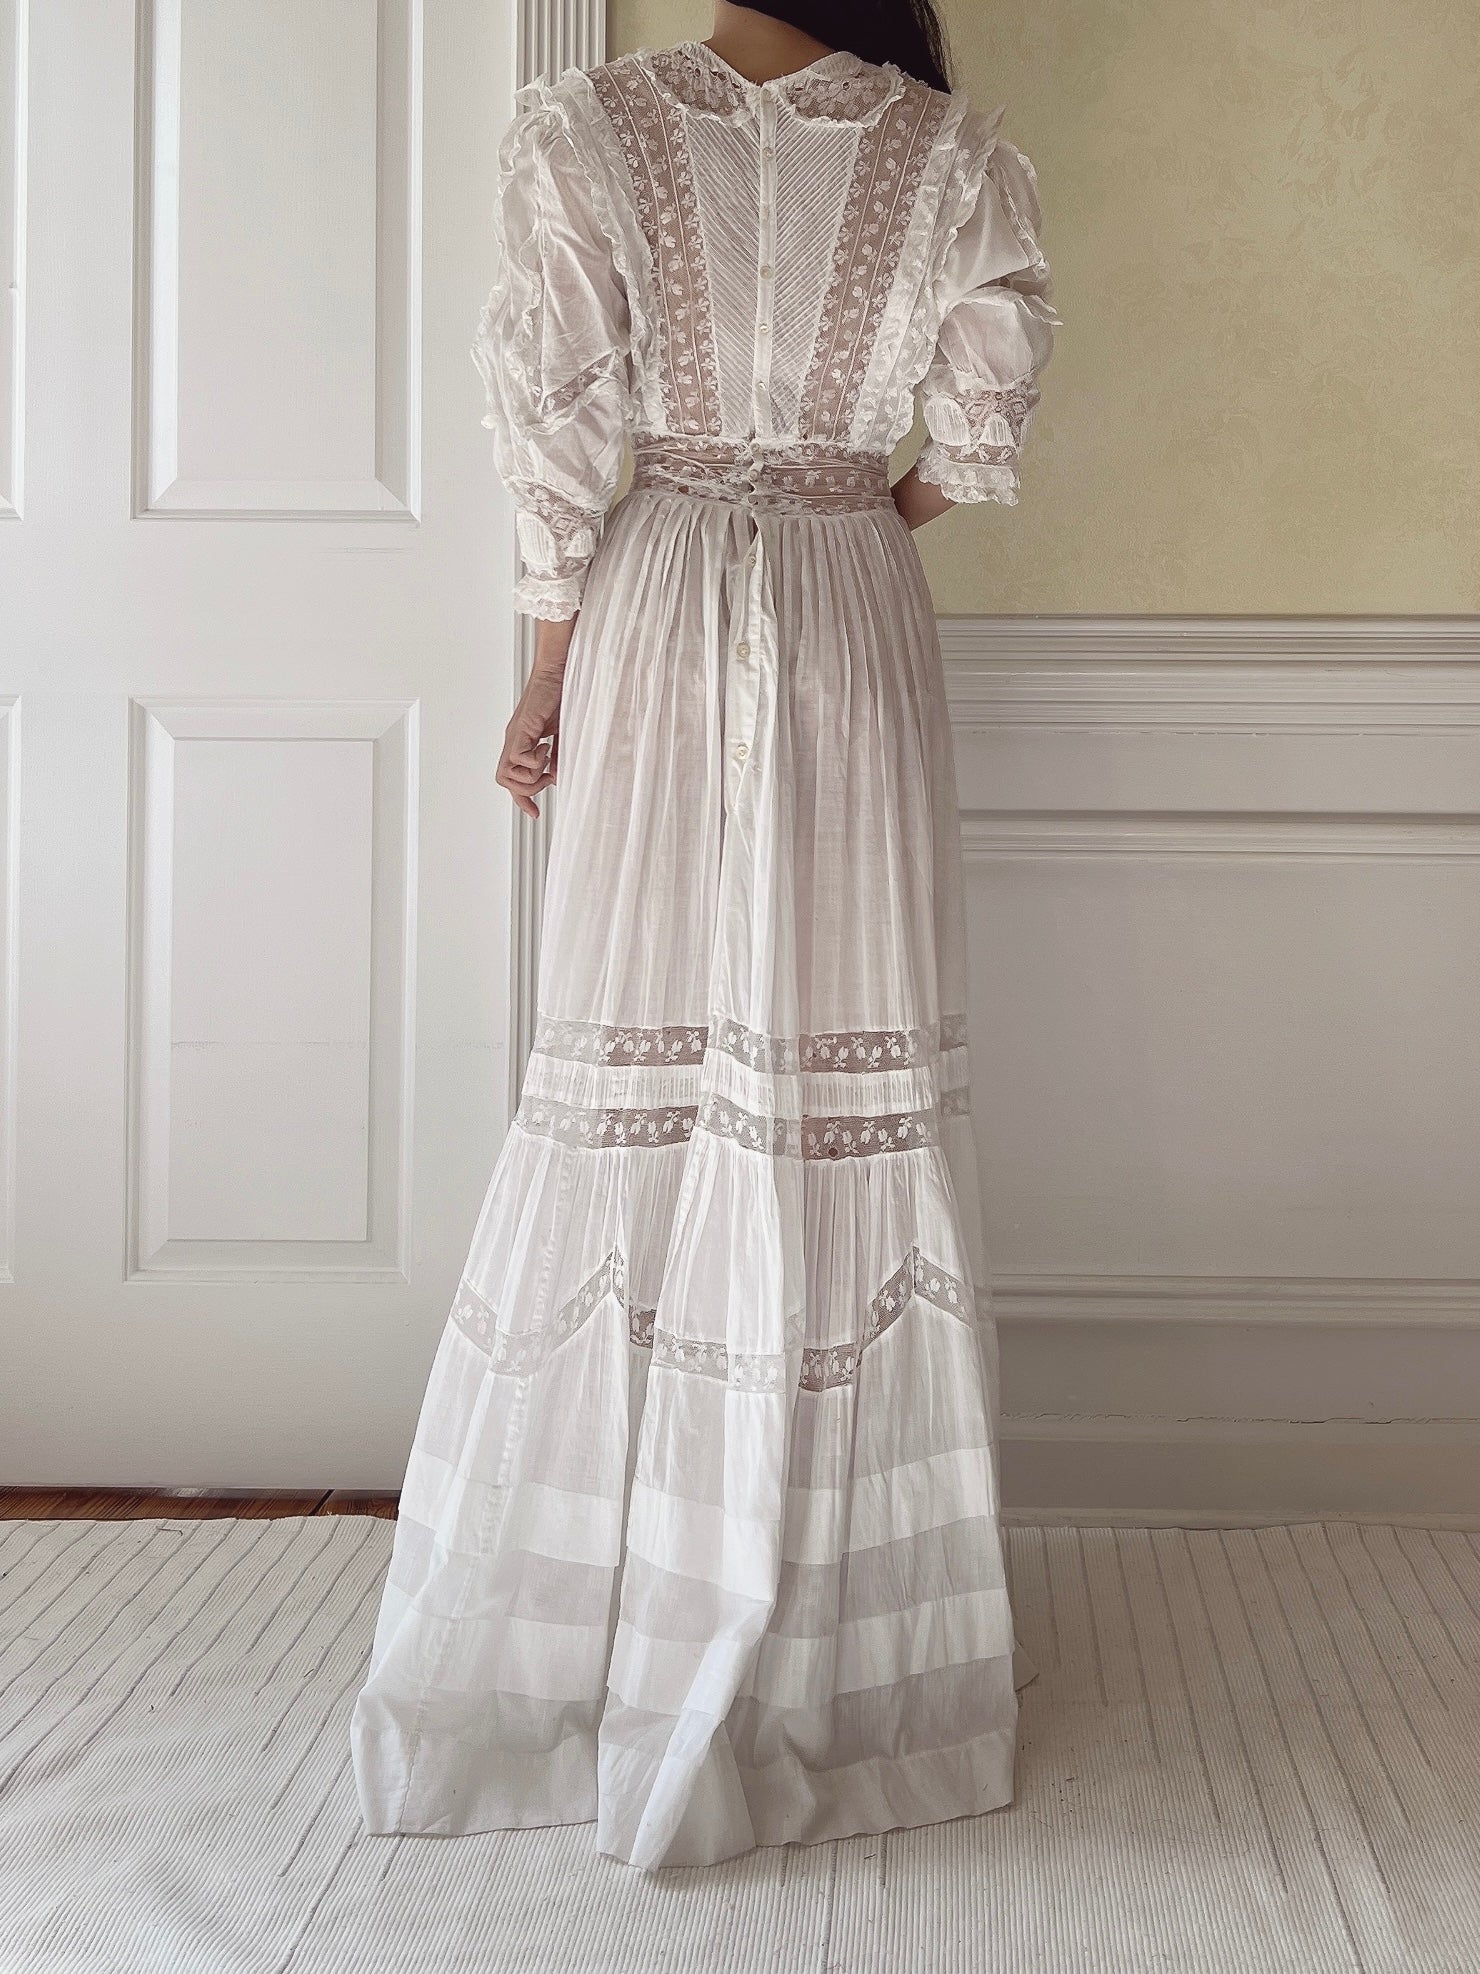 Antique Cotton and Lace Gown - S